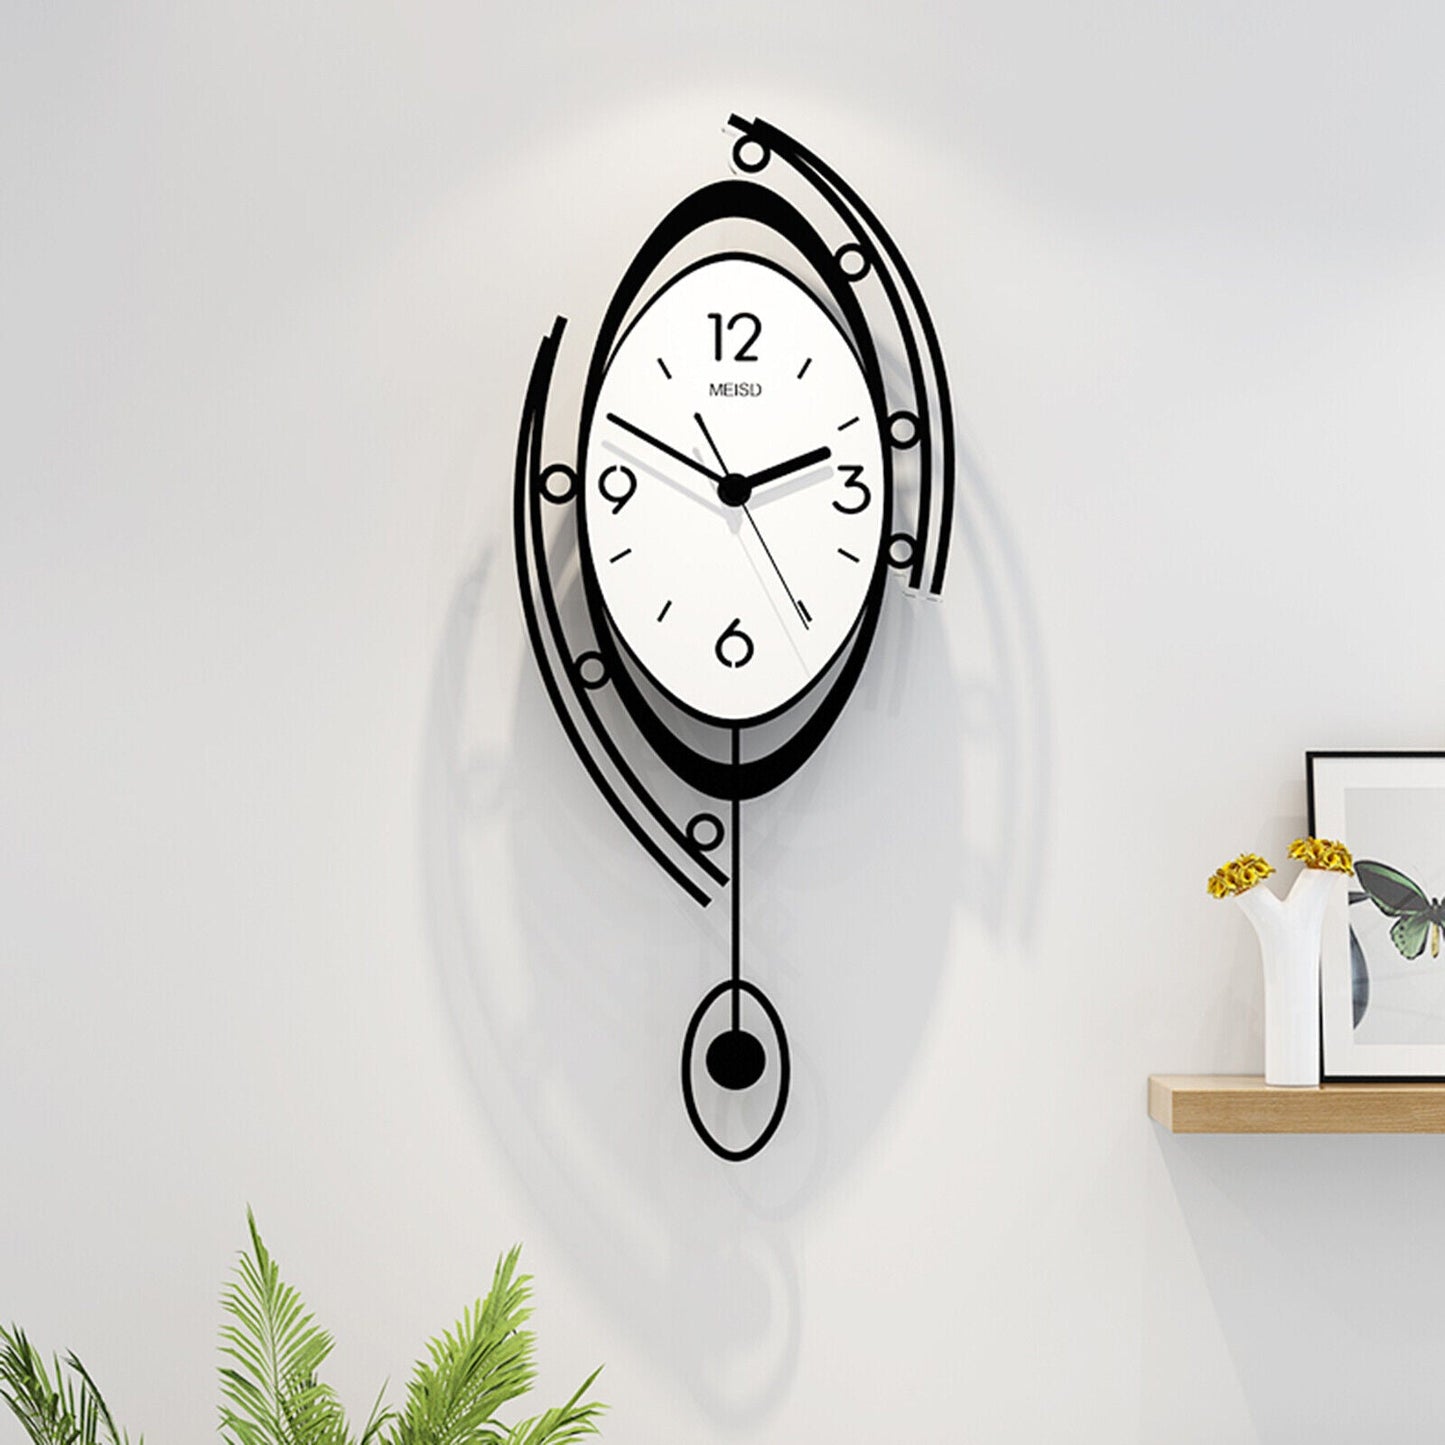 3D Wall Clock with Pendulum in Large